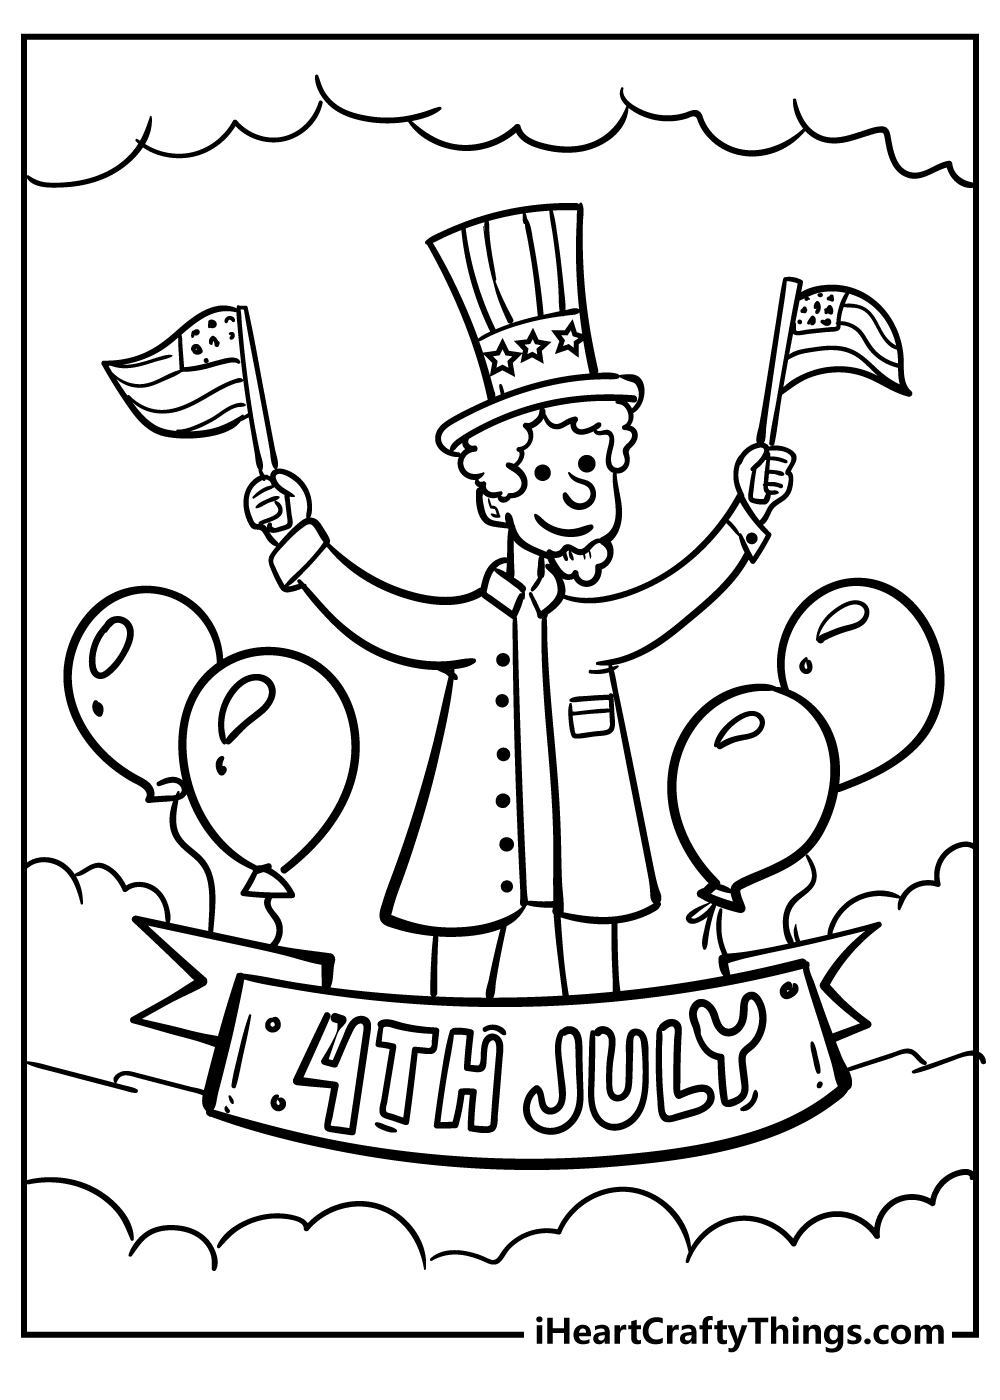 Celebrate Freedom with 4th of July: 180+ Free Coloring Pages 83